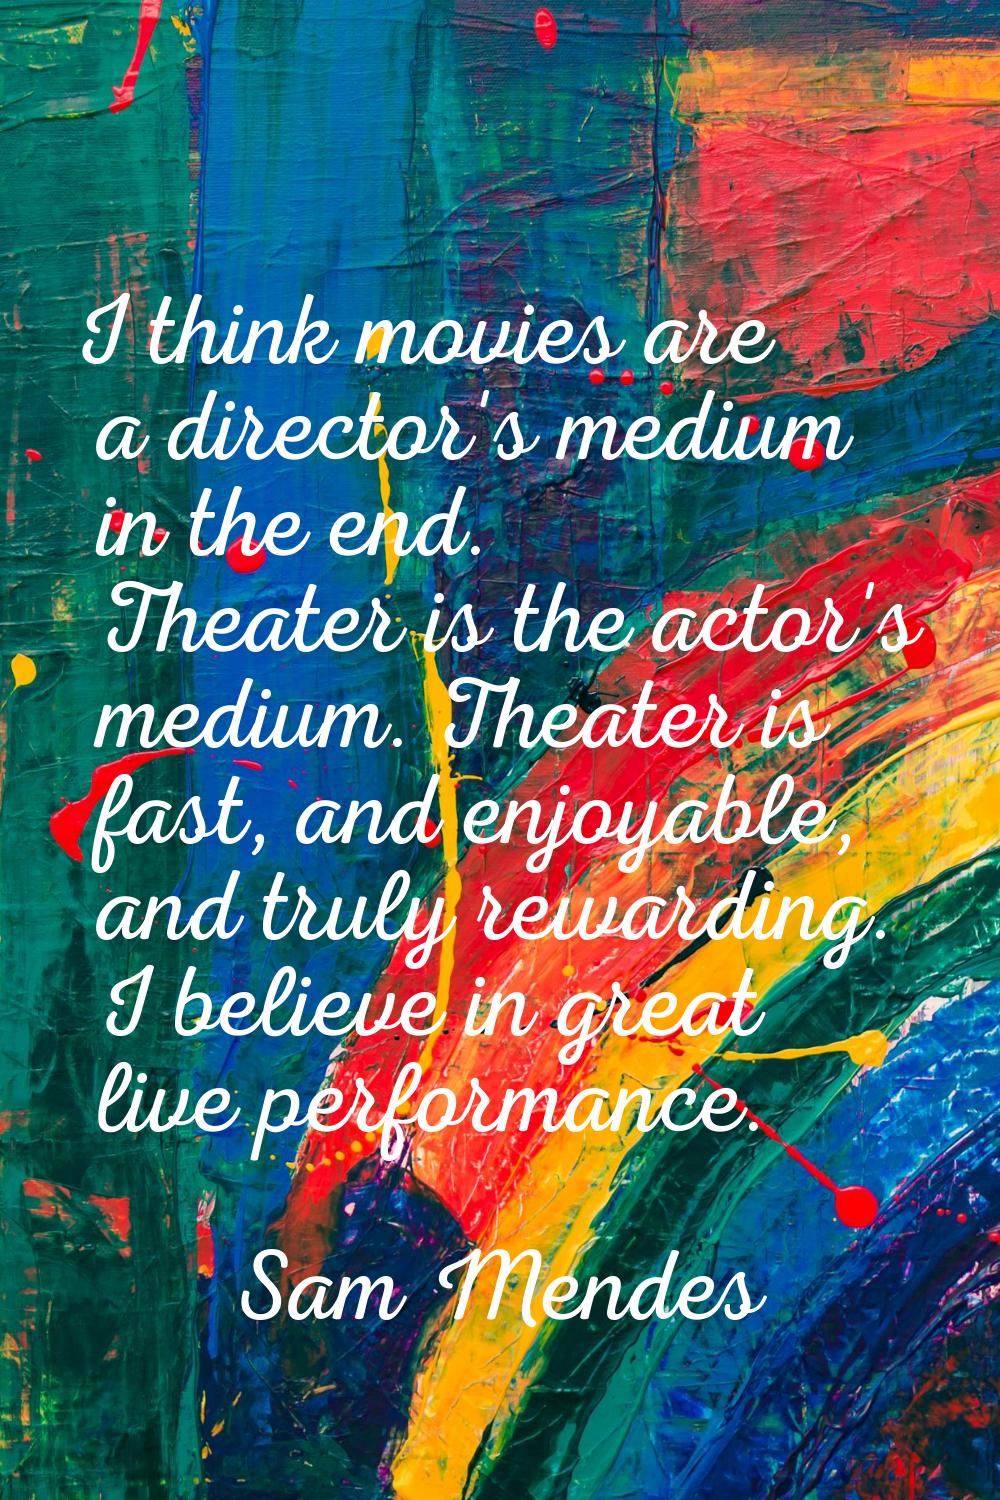 I think movies are a director's medium in the end. Theater is the actor's medium. Theater is fast, 